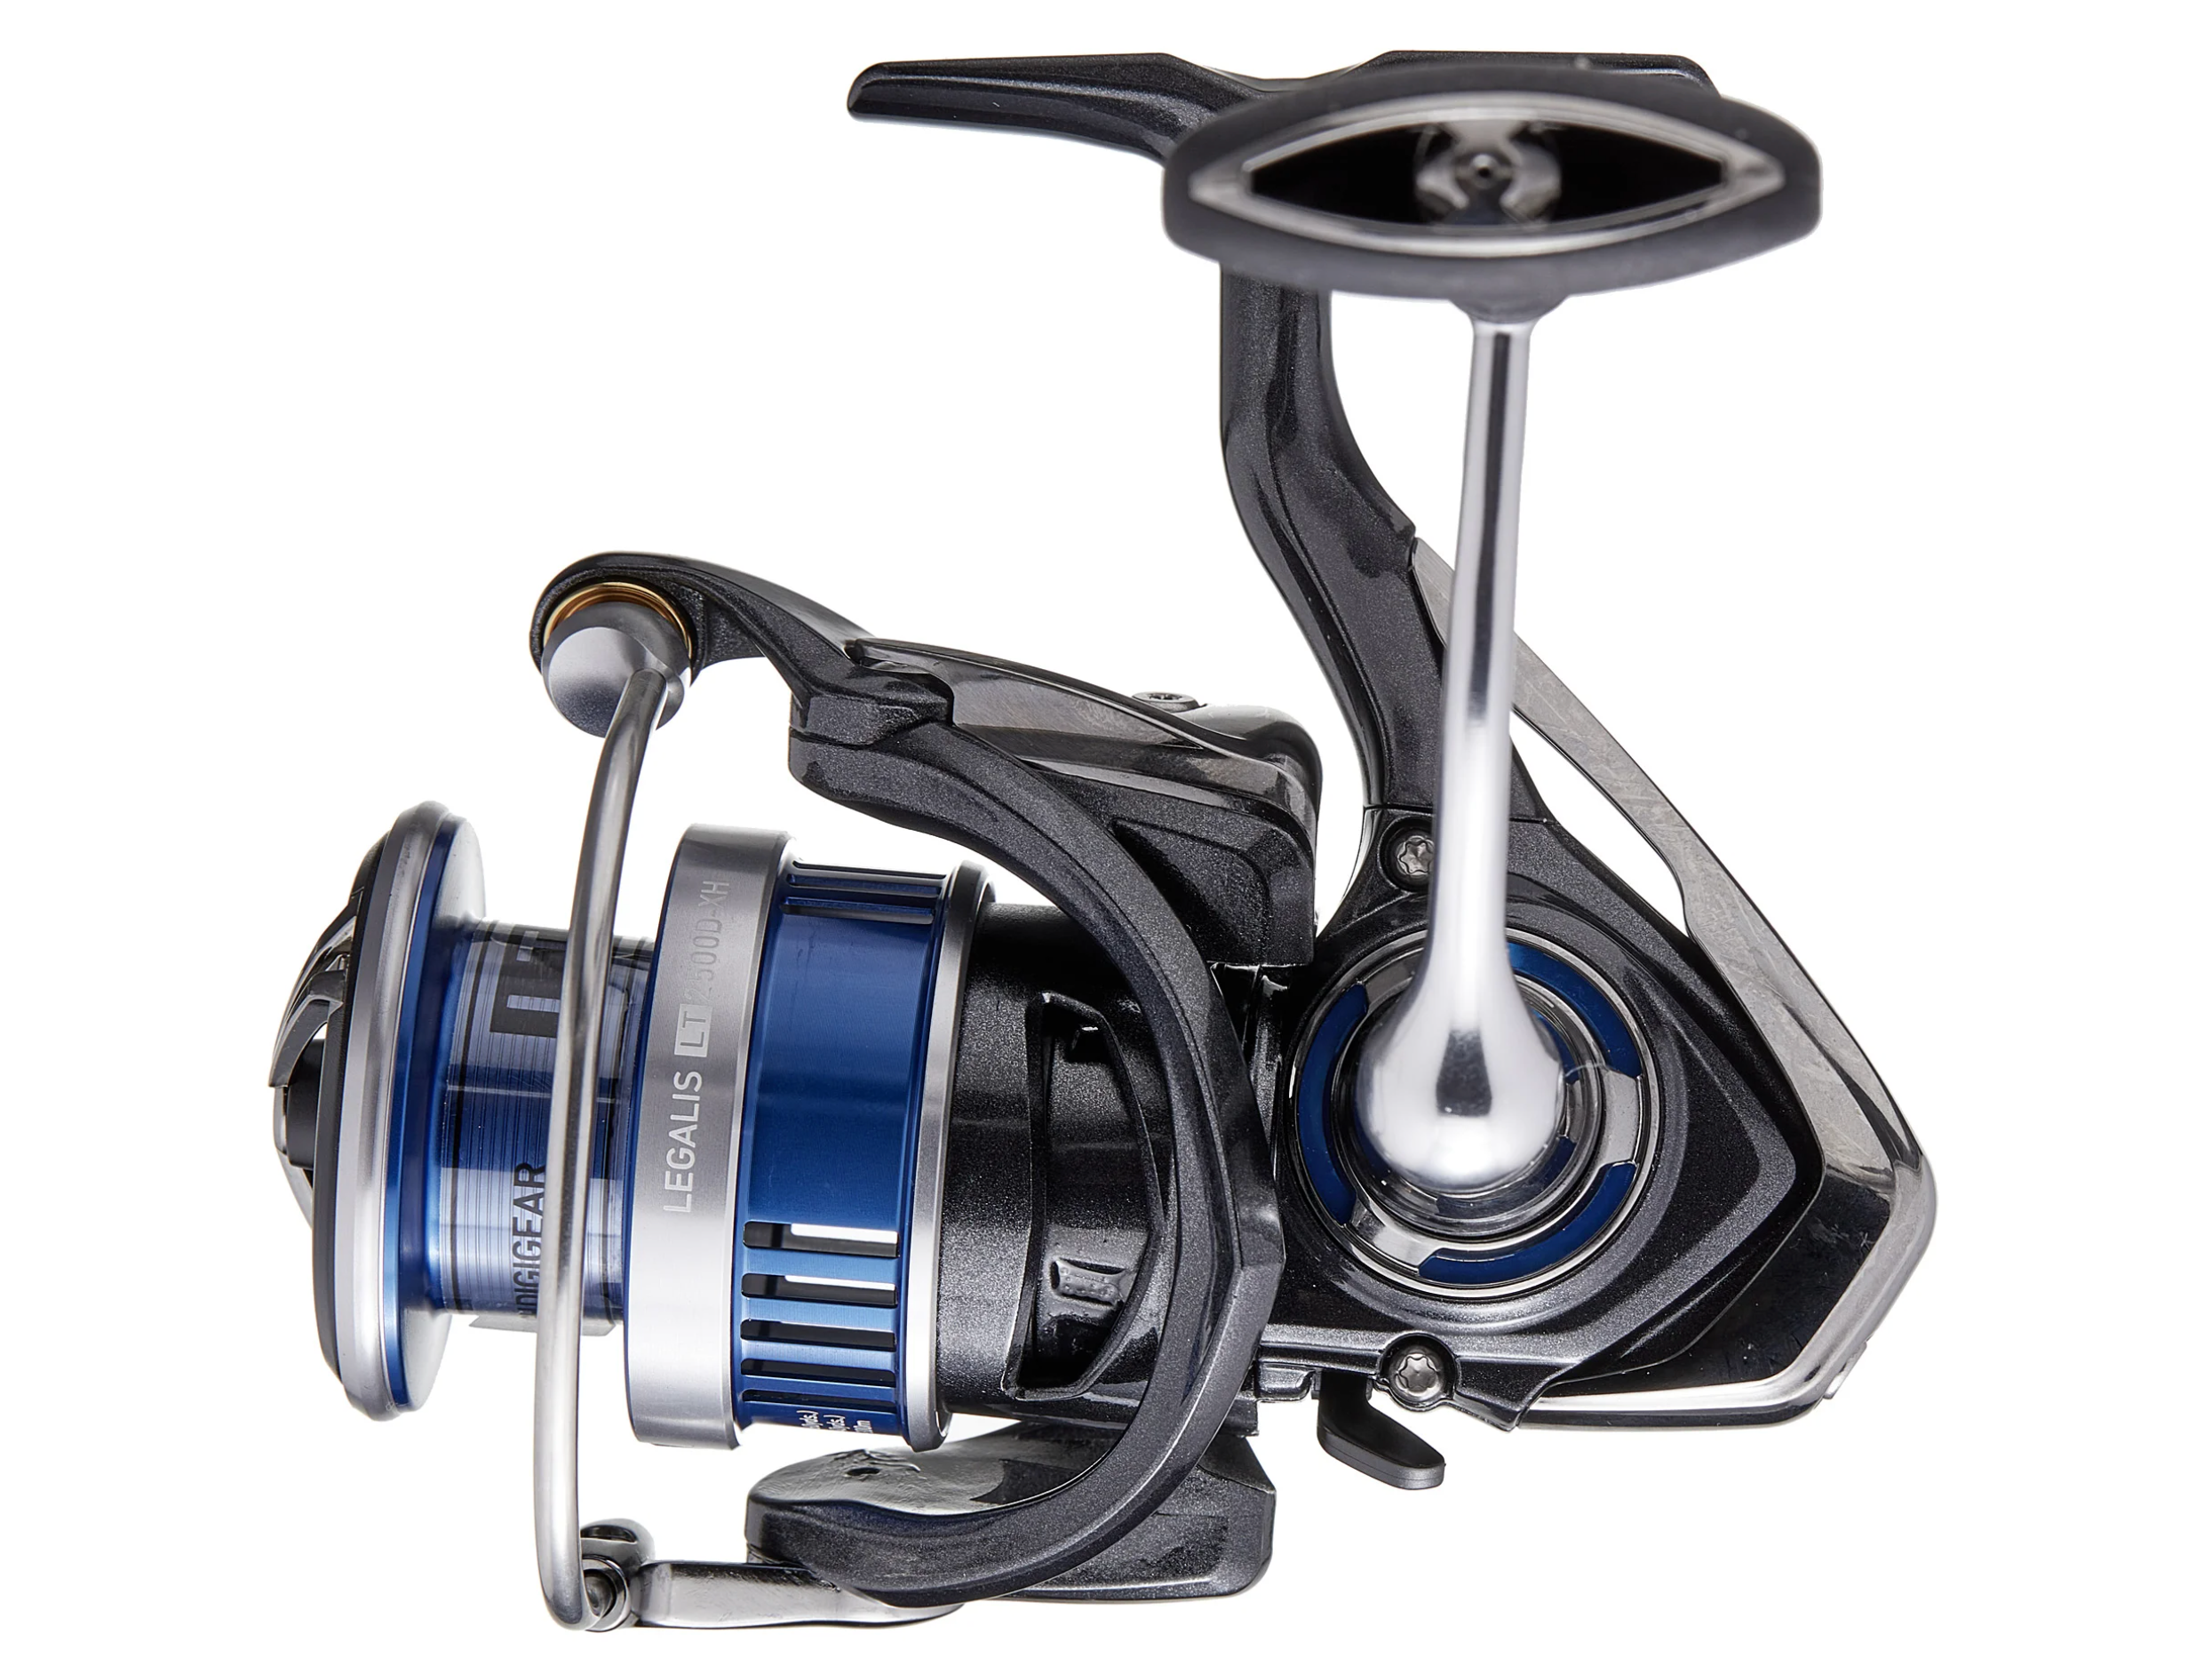 All Metal Wire Cup Spinning Reel 13 Ball Bearing Fishing Wheel Long Cast  Spool Balanced Rotor System FreshSaltwater Strong5209519 From Hxfn, $17.67